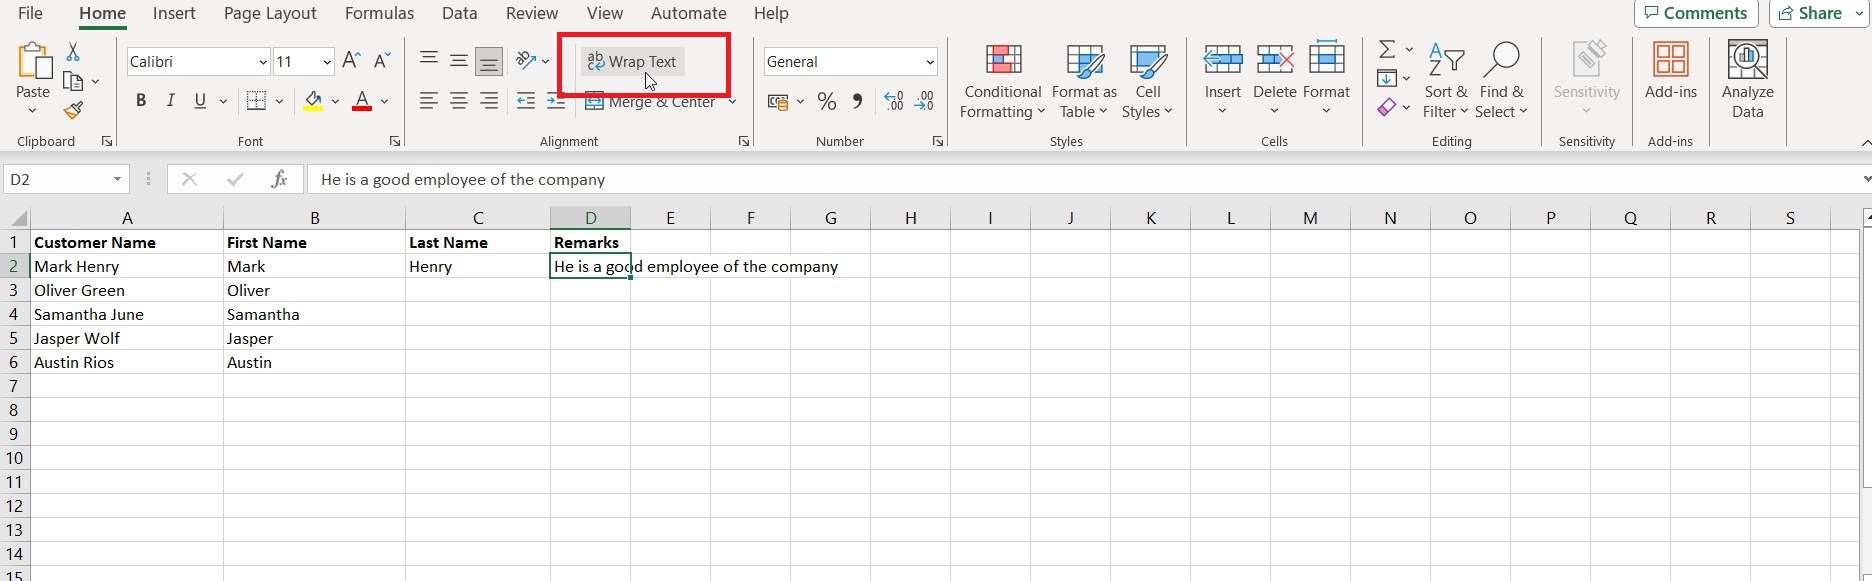 Learn how to create a spreadsheet in Excel and use the "Next Line" function for organizing your data.